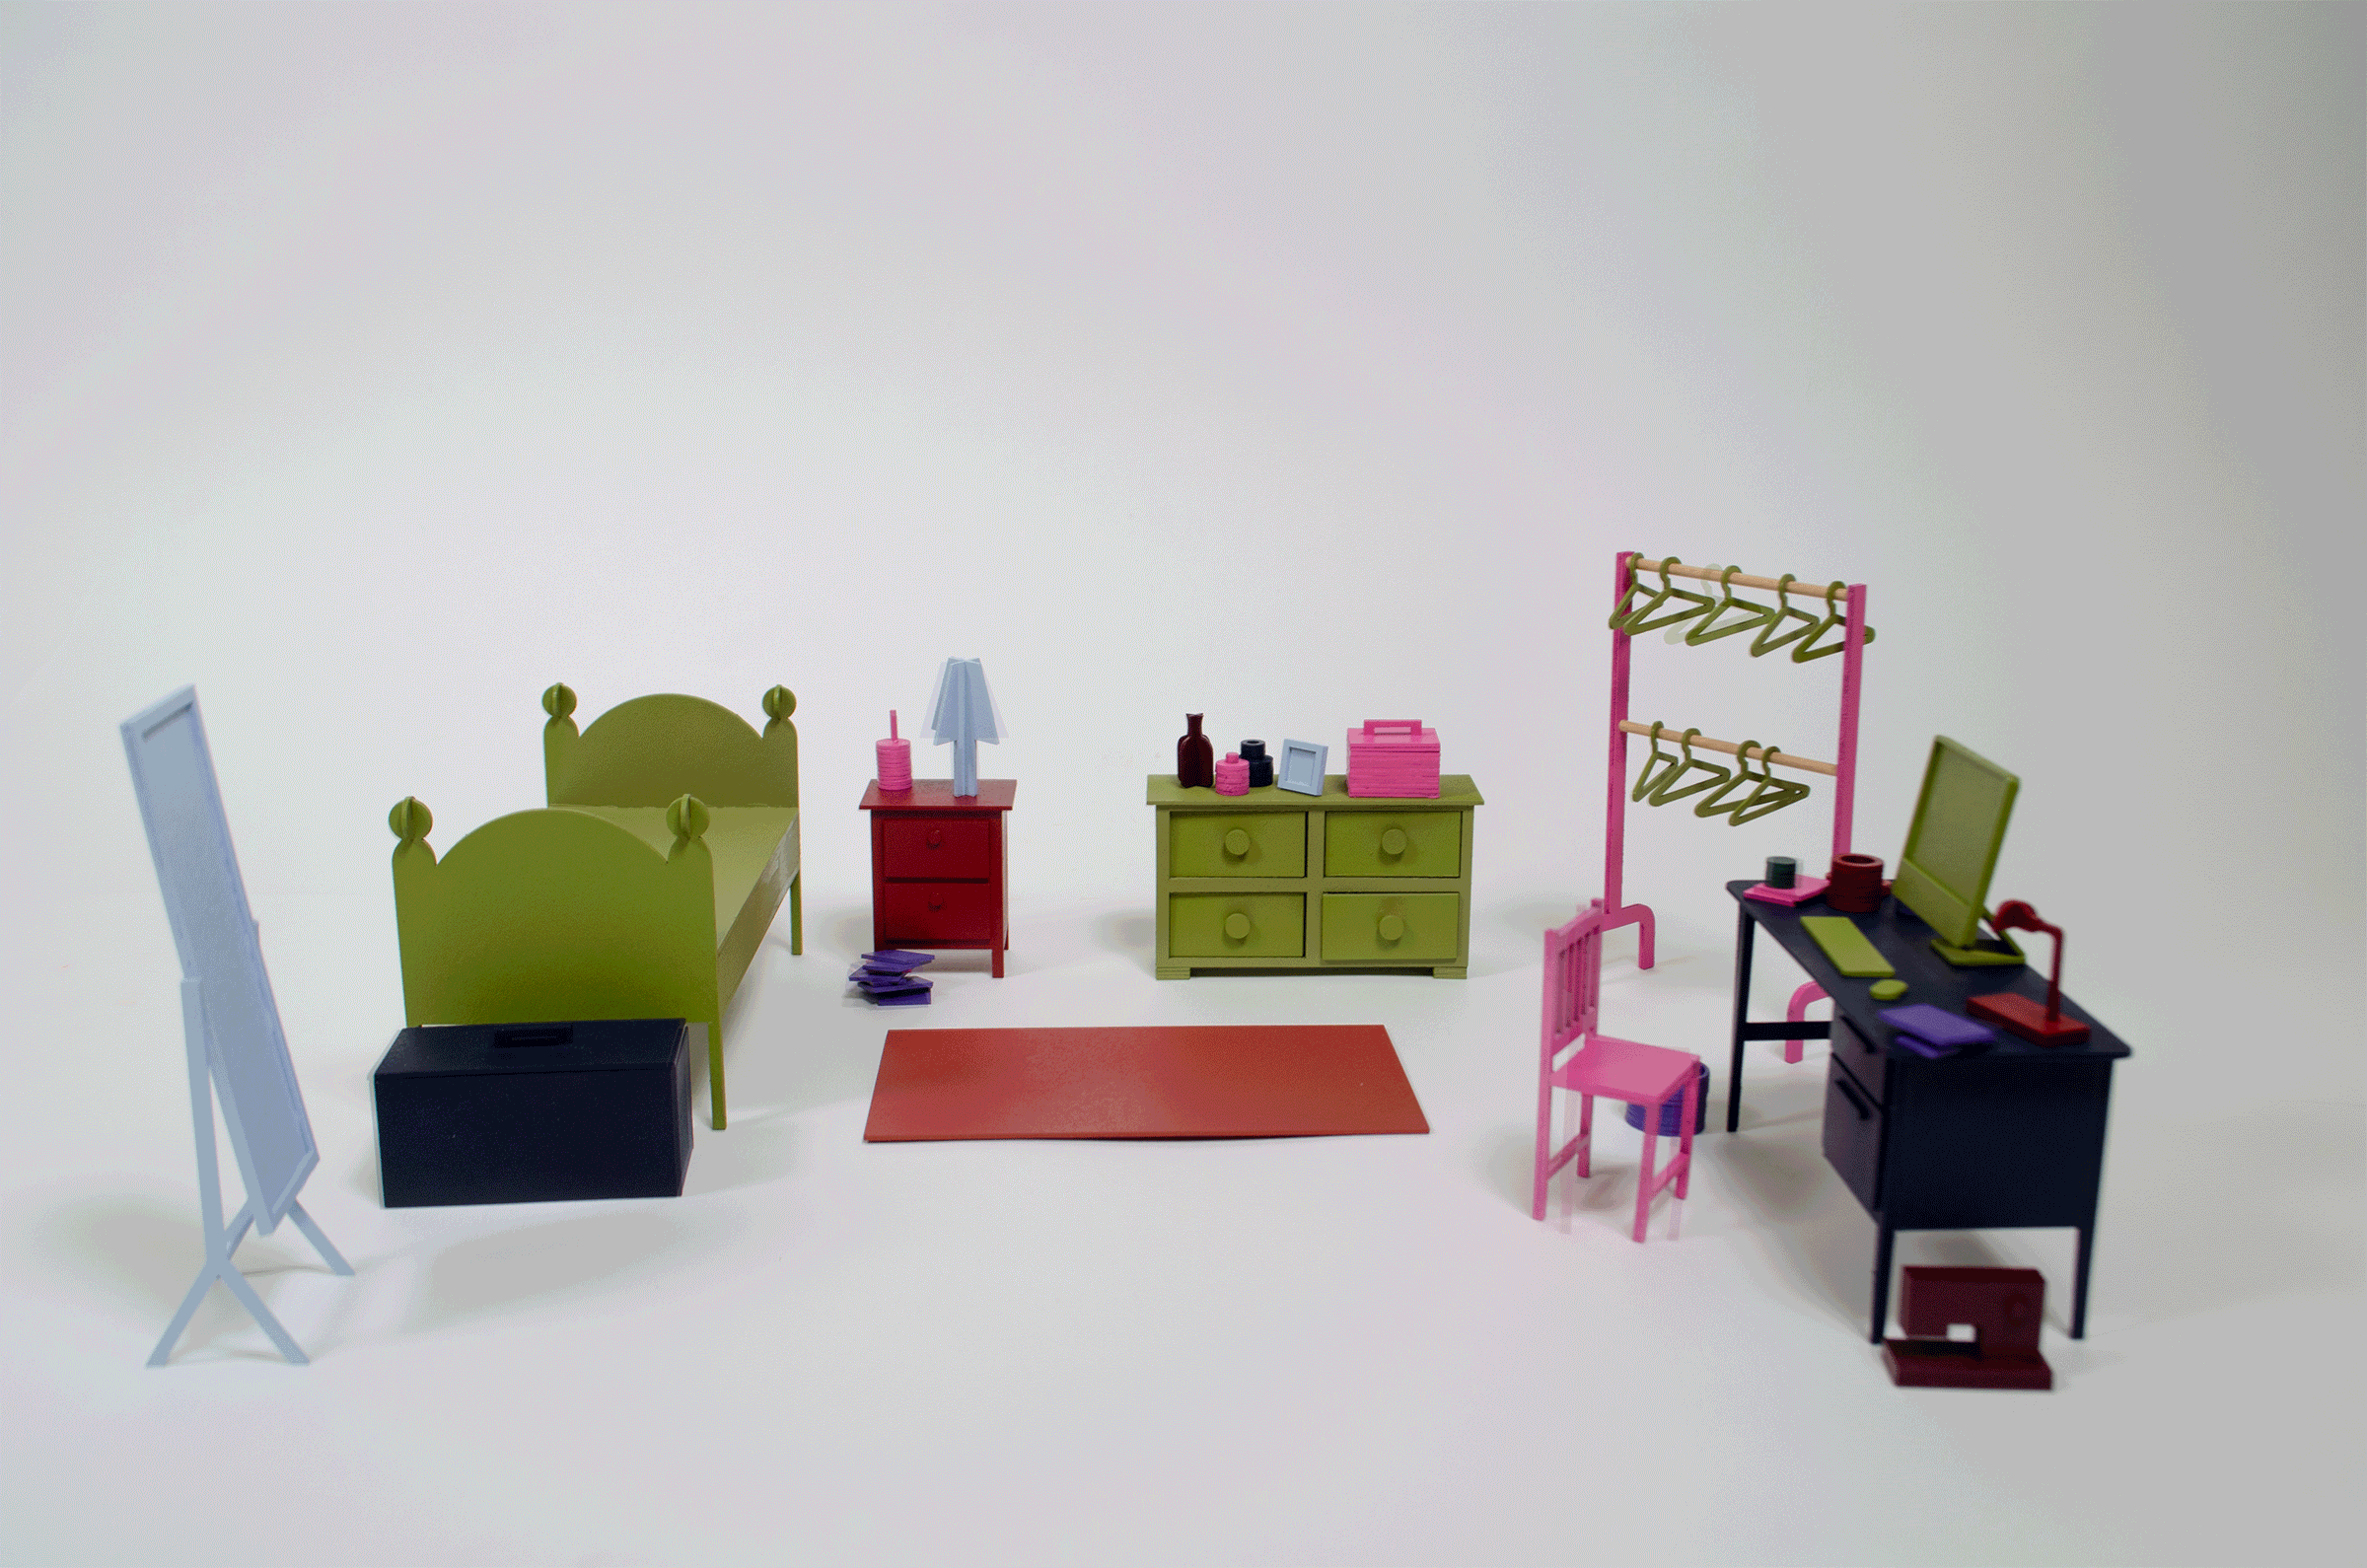 /stop%20motion%20gif%20of%20objects%20depicting%20a%20bedroom%20scene%2C%20documenting%20the%20movement%20of%20objects.%20